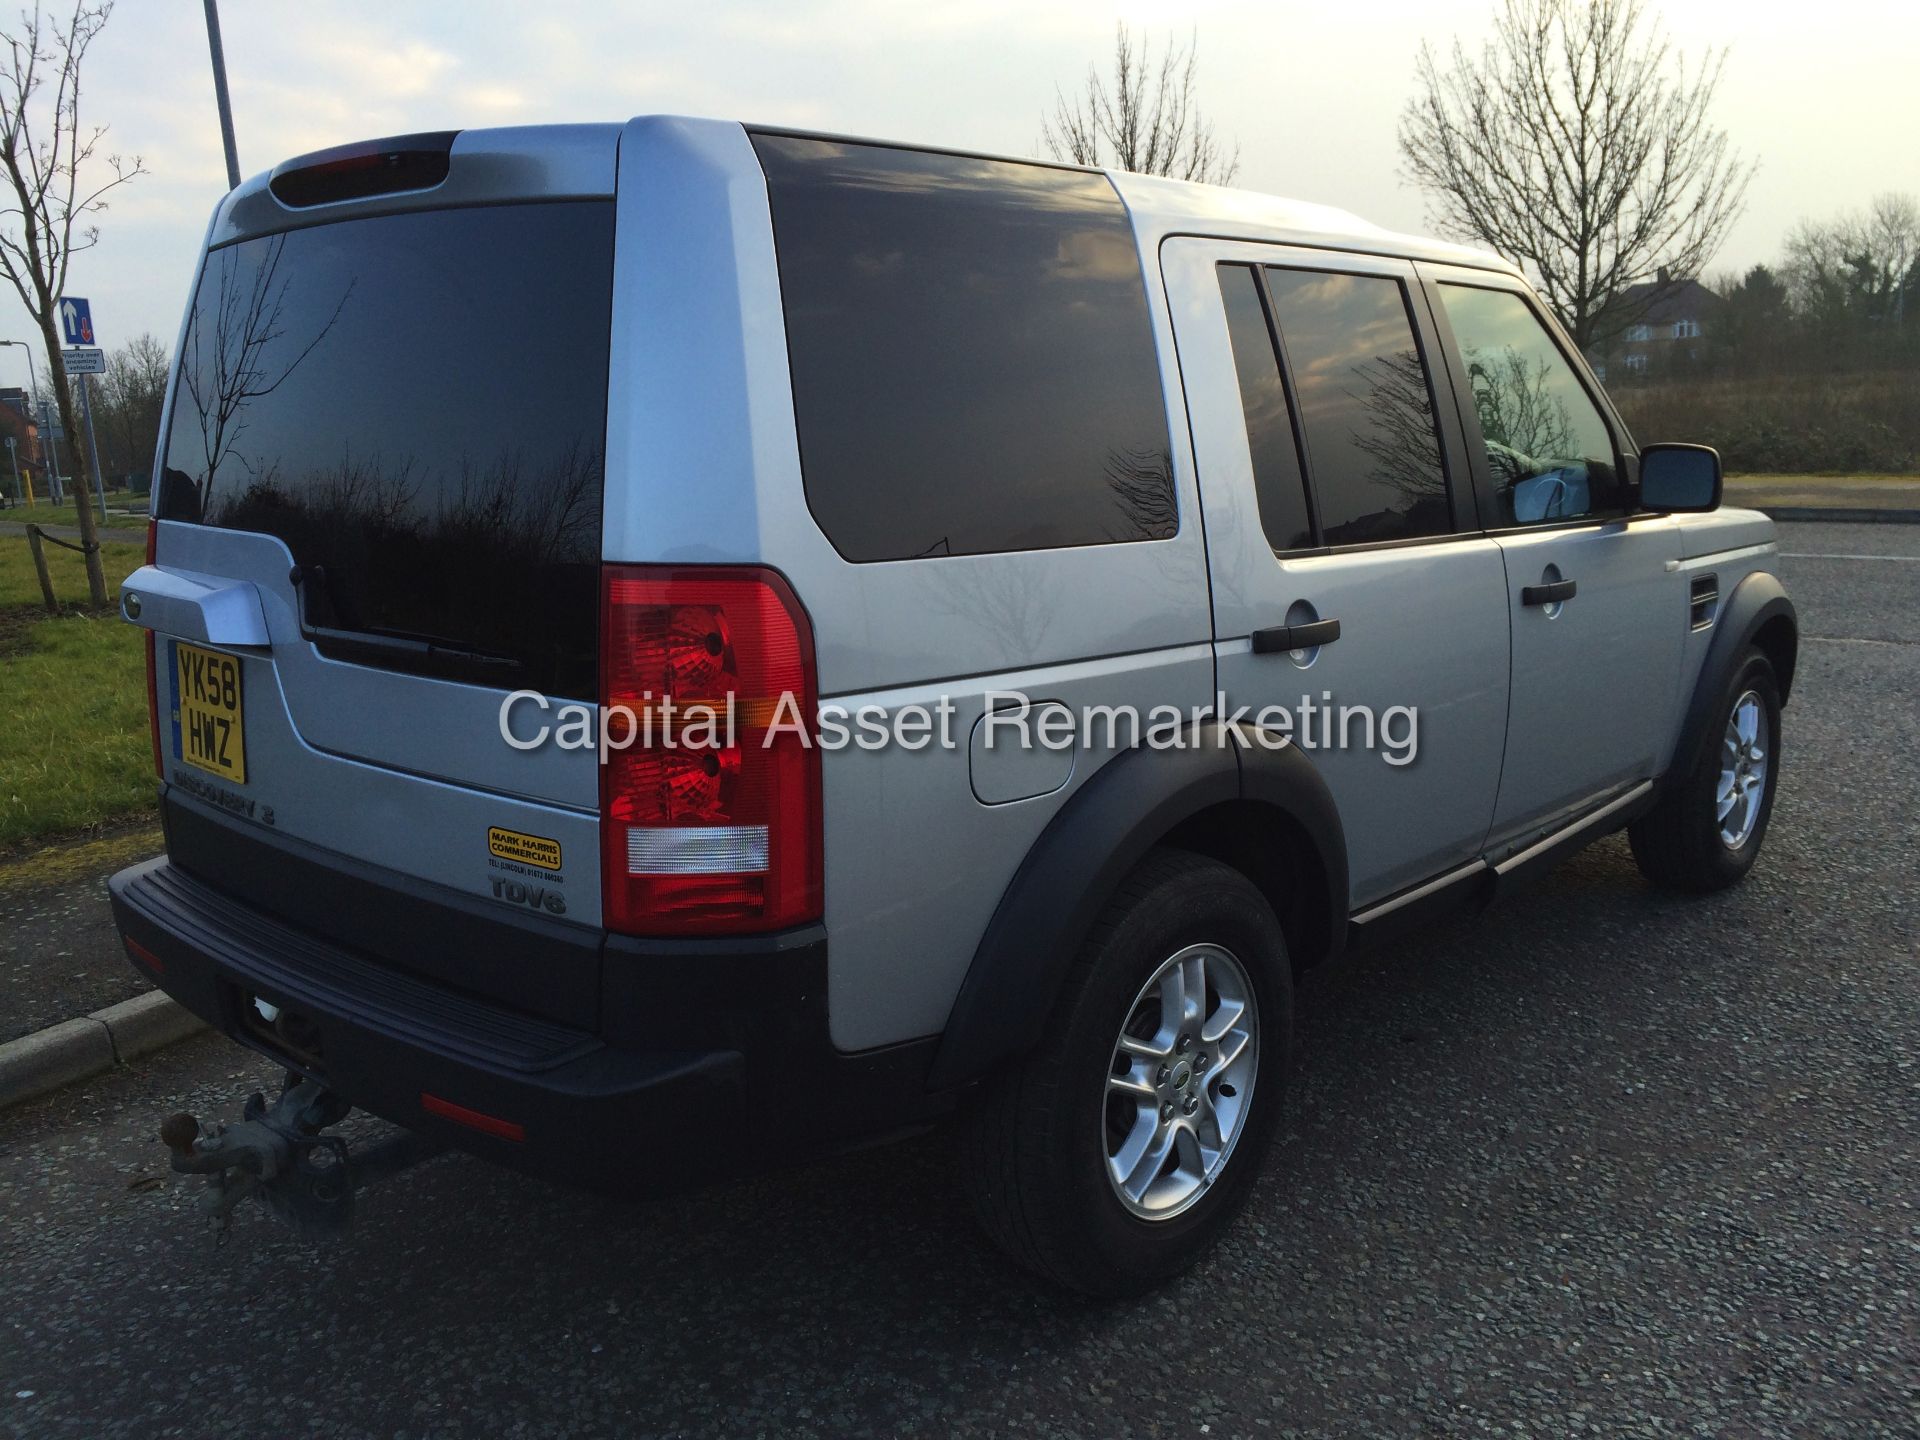 LANDROVER DISCOVERY 3 "TDV6" AUTOMATIC - 1 PREVIOUS OWNER FROM NEW - AIR SUSPENSION - PRIVACY GLASS! - Image 5 of 18